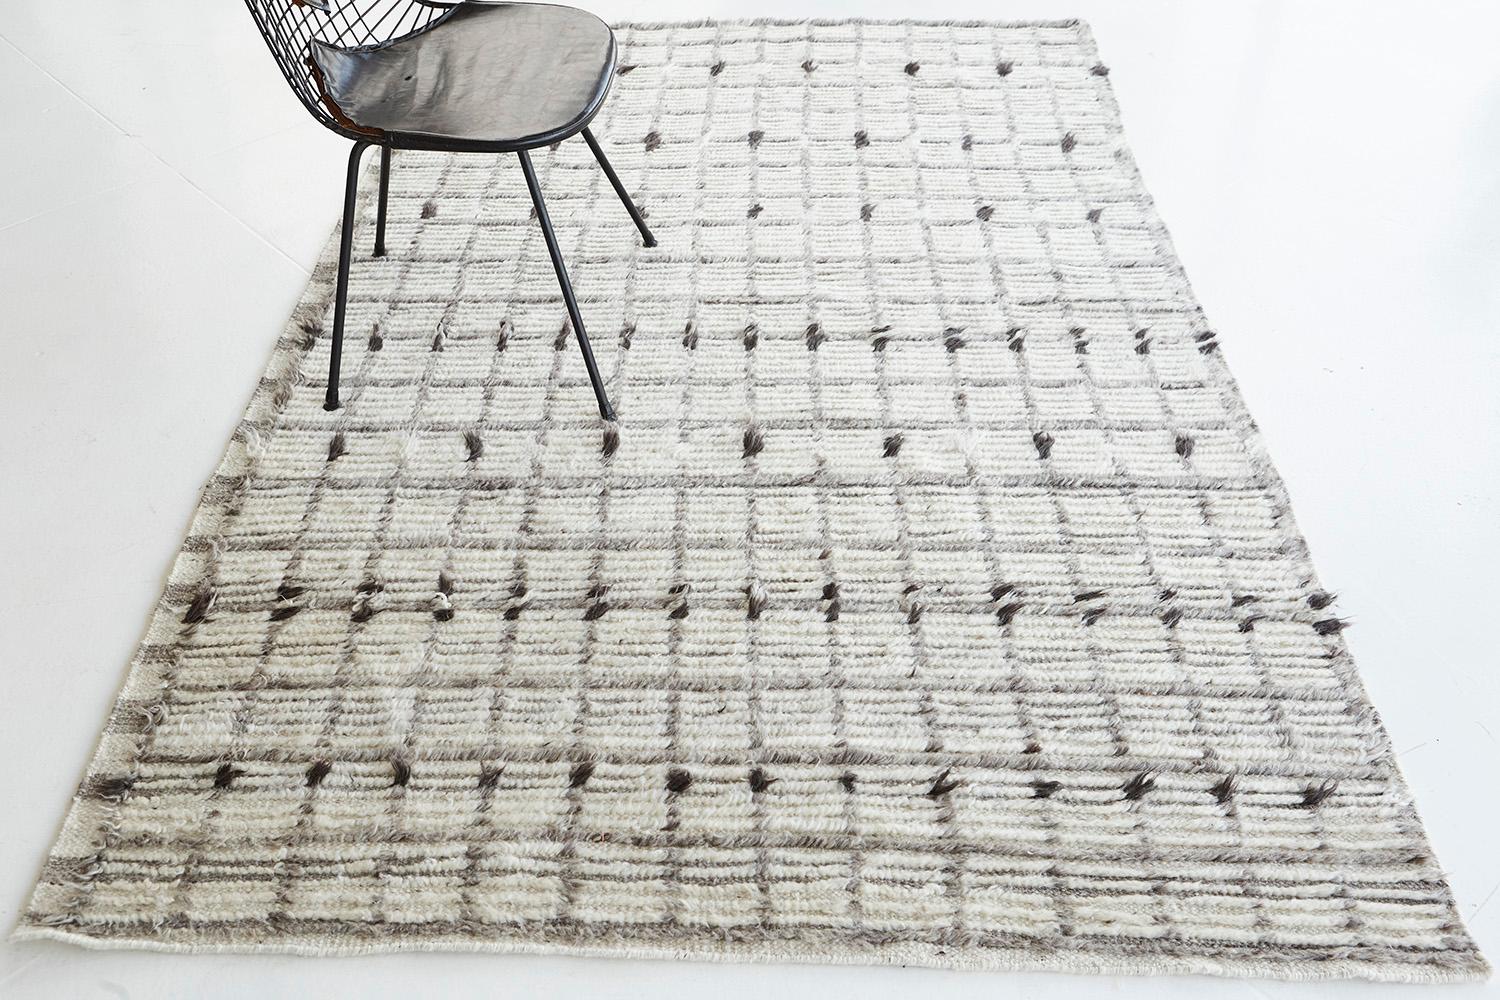 Amihan is a beautifully detailed pile weave from our Atlas Collection. The delicate checkered and ribbed style rug with grayscale tones gives a rich and charming feel. Repeating ash pile detailing also brings a bold and noteworthy uniqueness to this